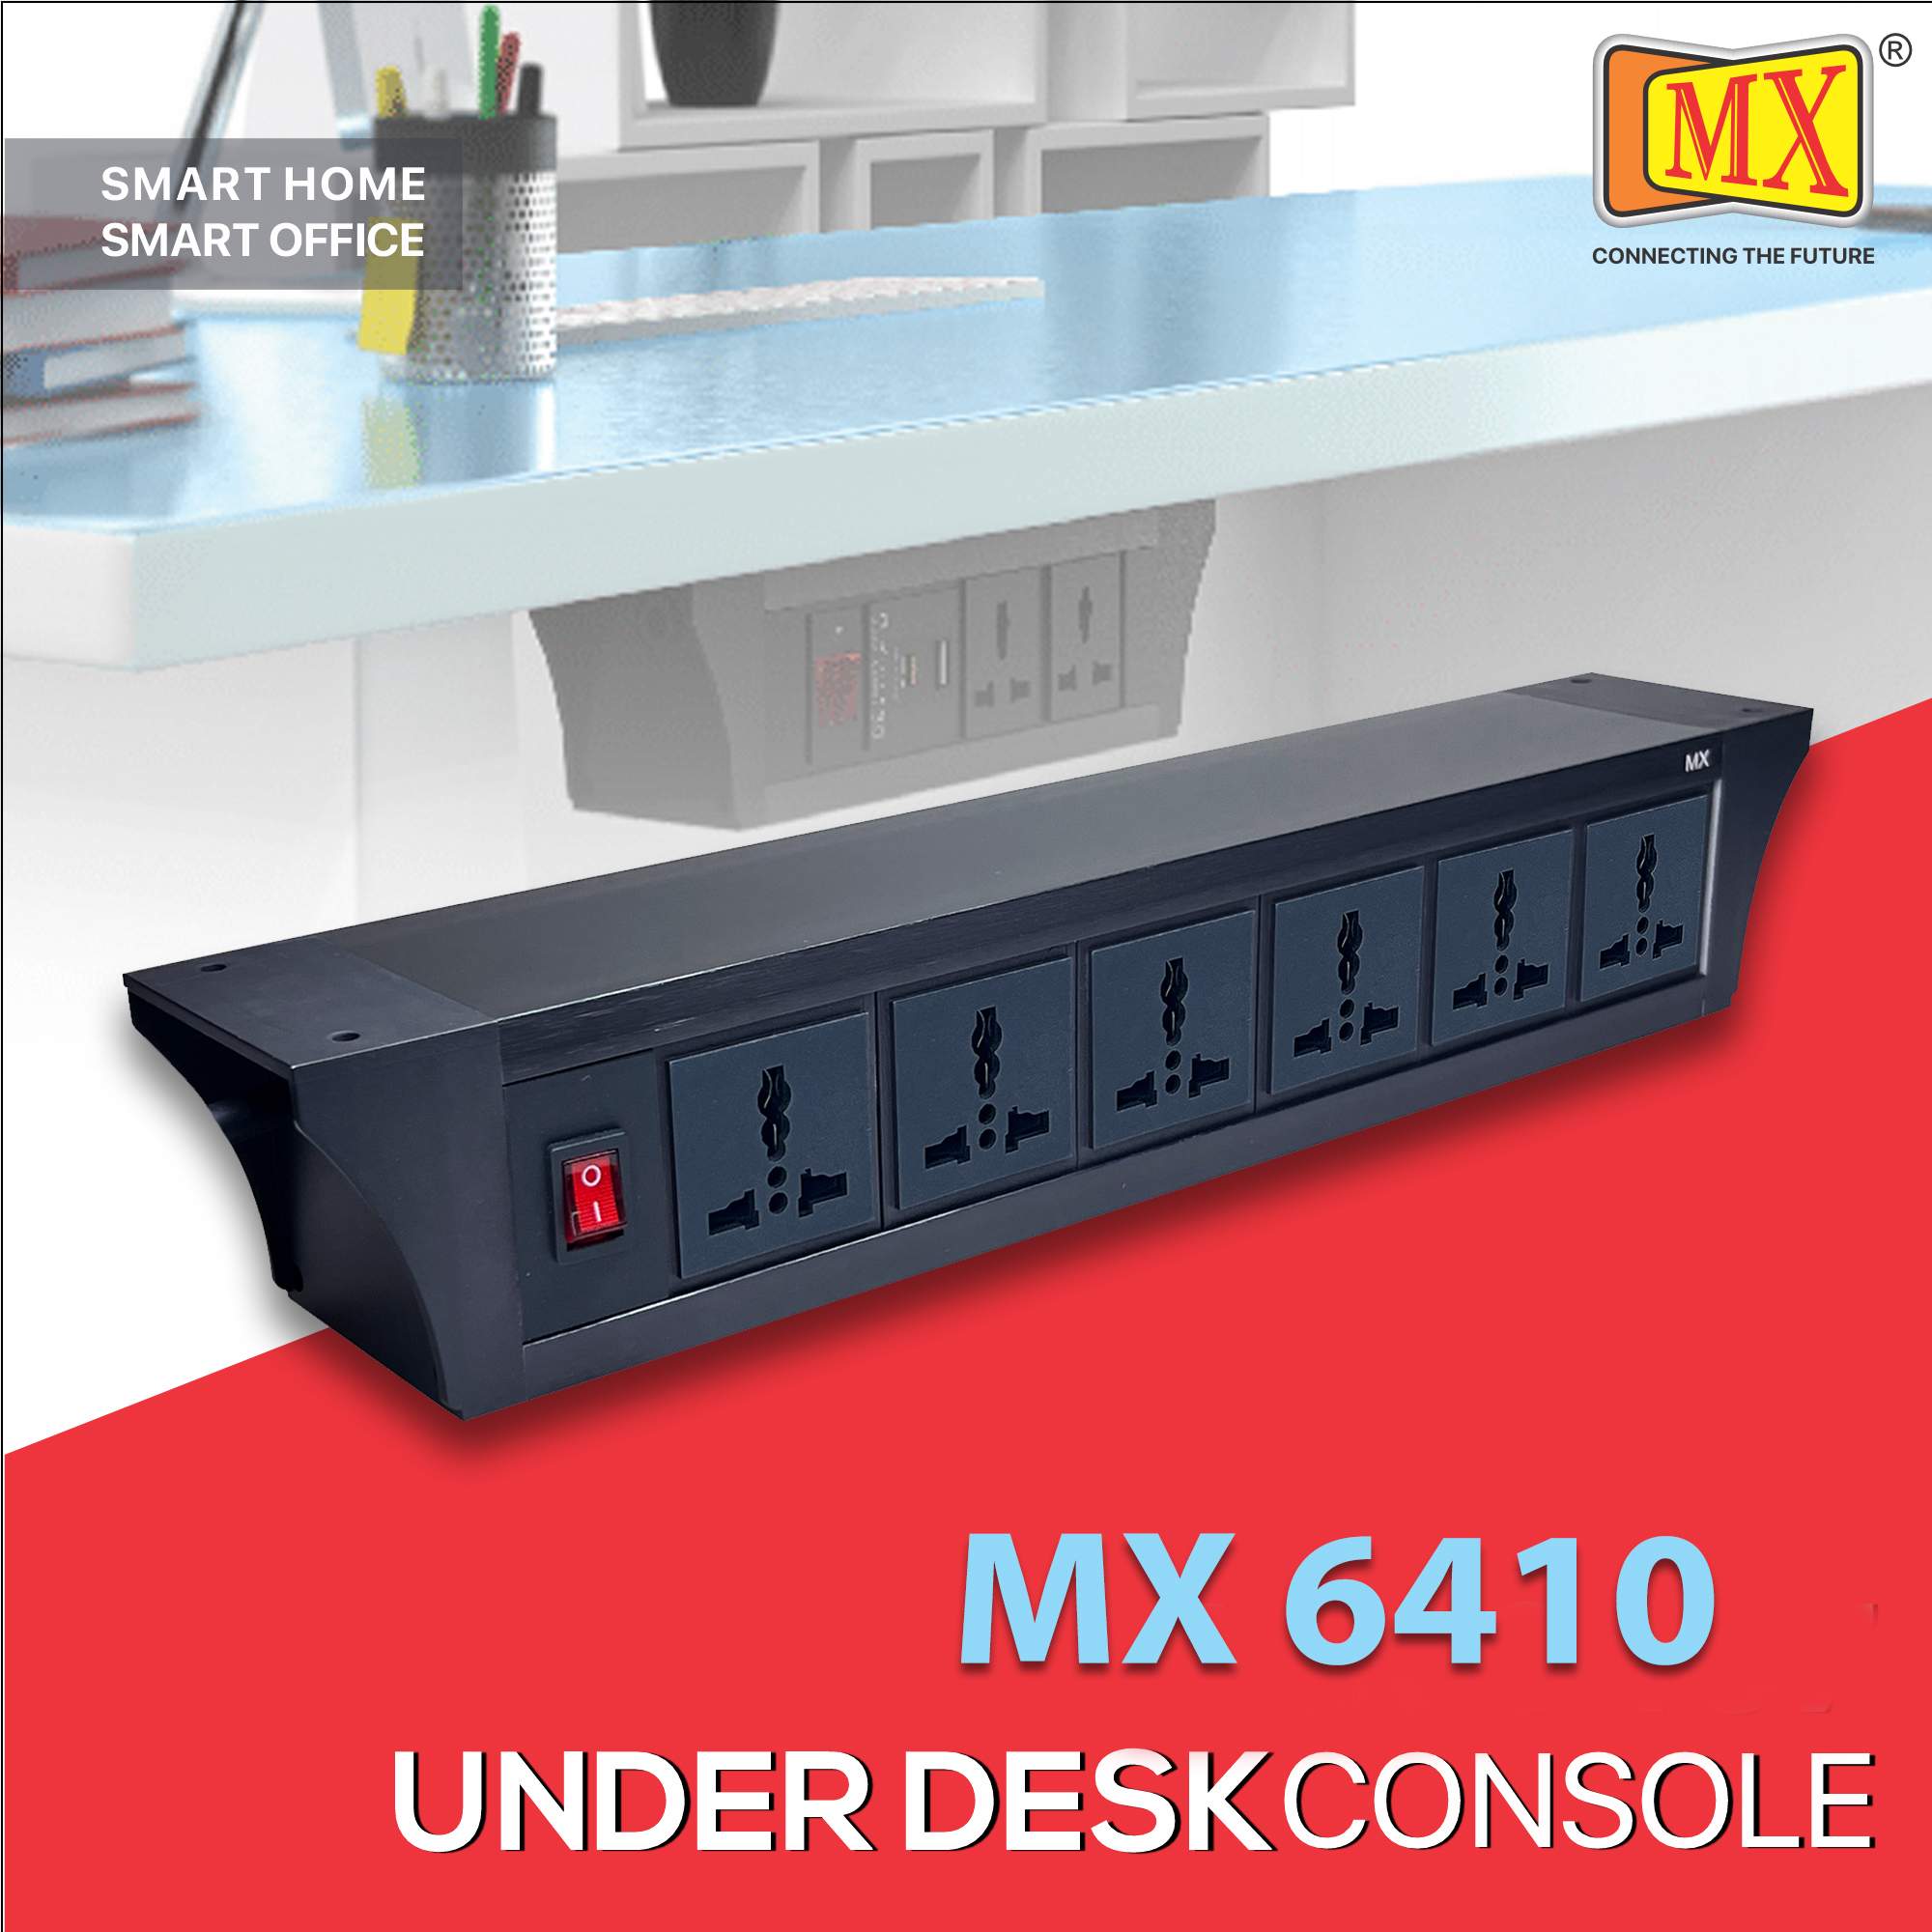 MX PDU Under table 6/13 Amps 6 Universal Socket | 2 USB (2.4 Amp) with Dual Pole LED Indicator Switch | 10 Amps Heavy Duty Cord 5 Meter with ISI Marked, Aluminium Body Material (MX-6410-5M Black)